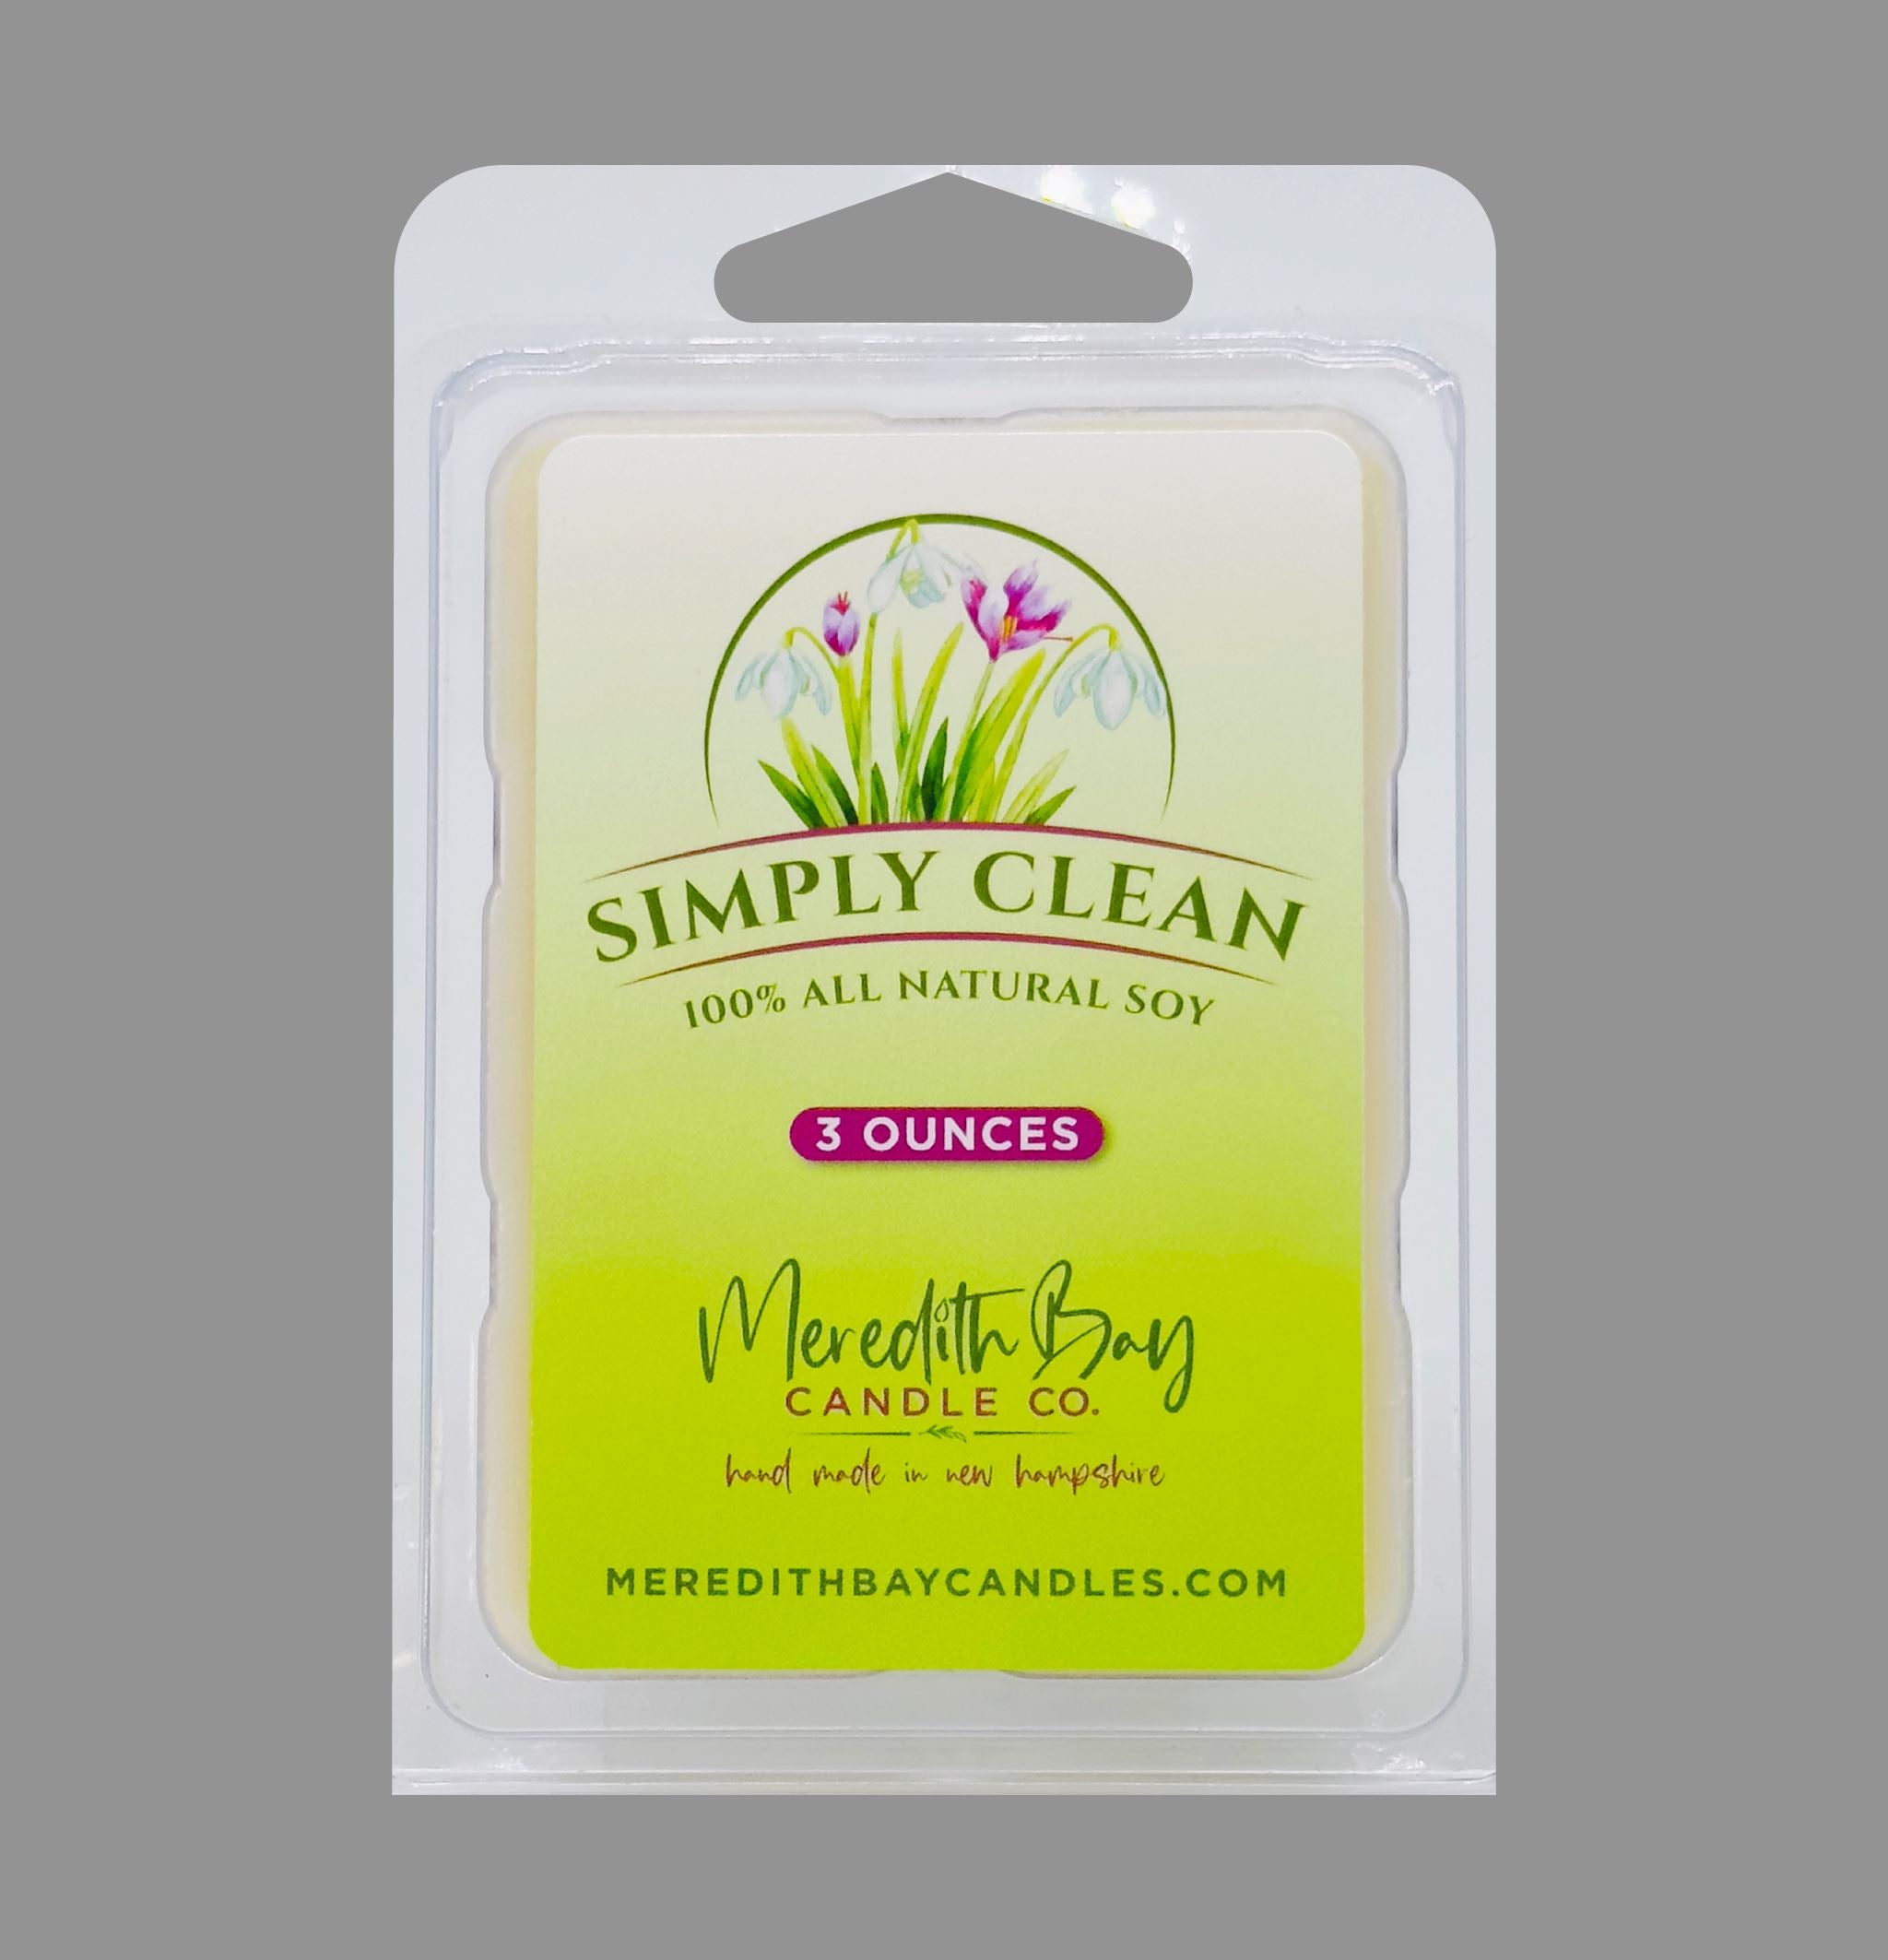 Simply Clean Wax Melt Meredith Bay Candle Co 